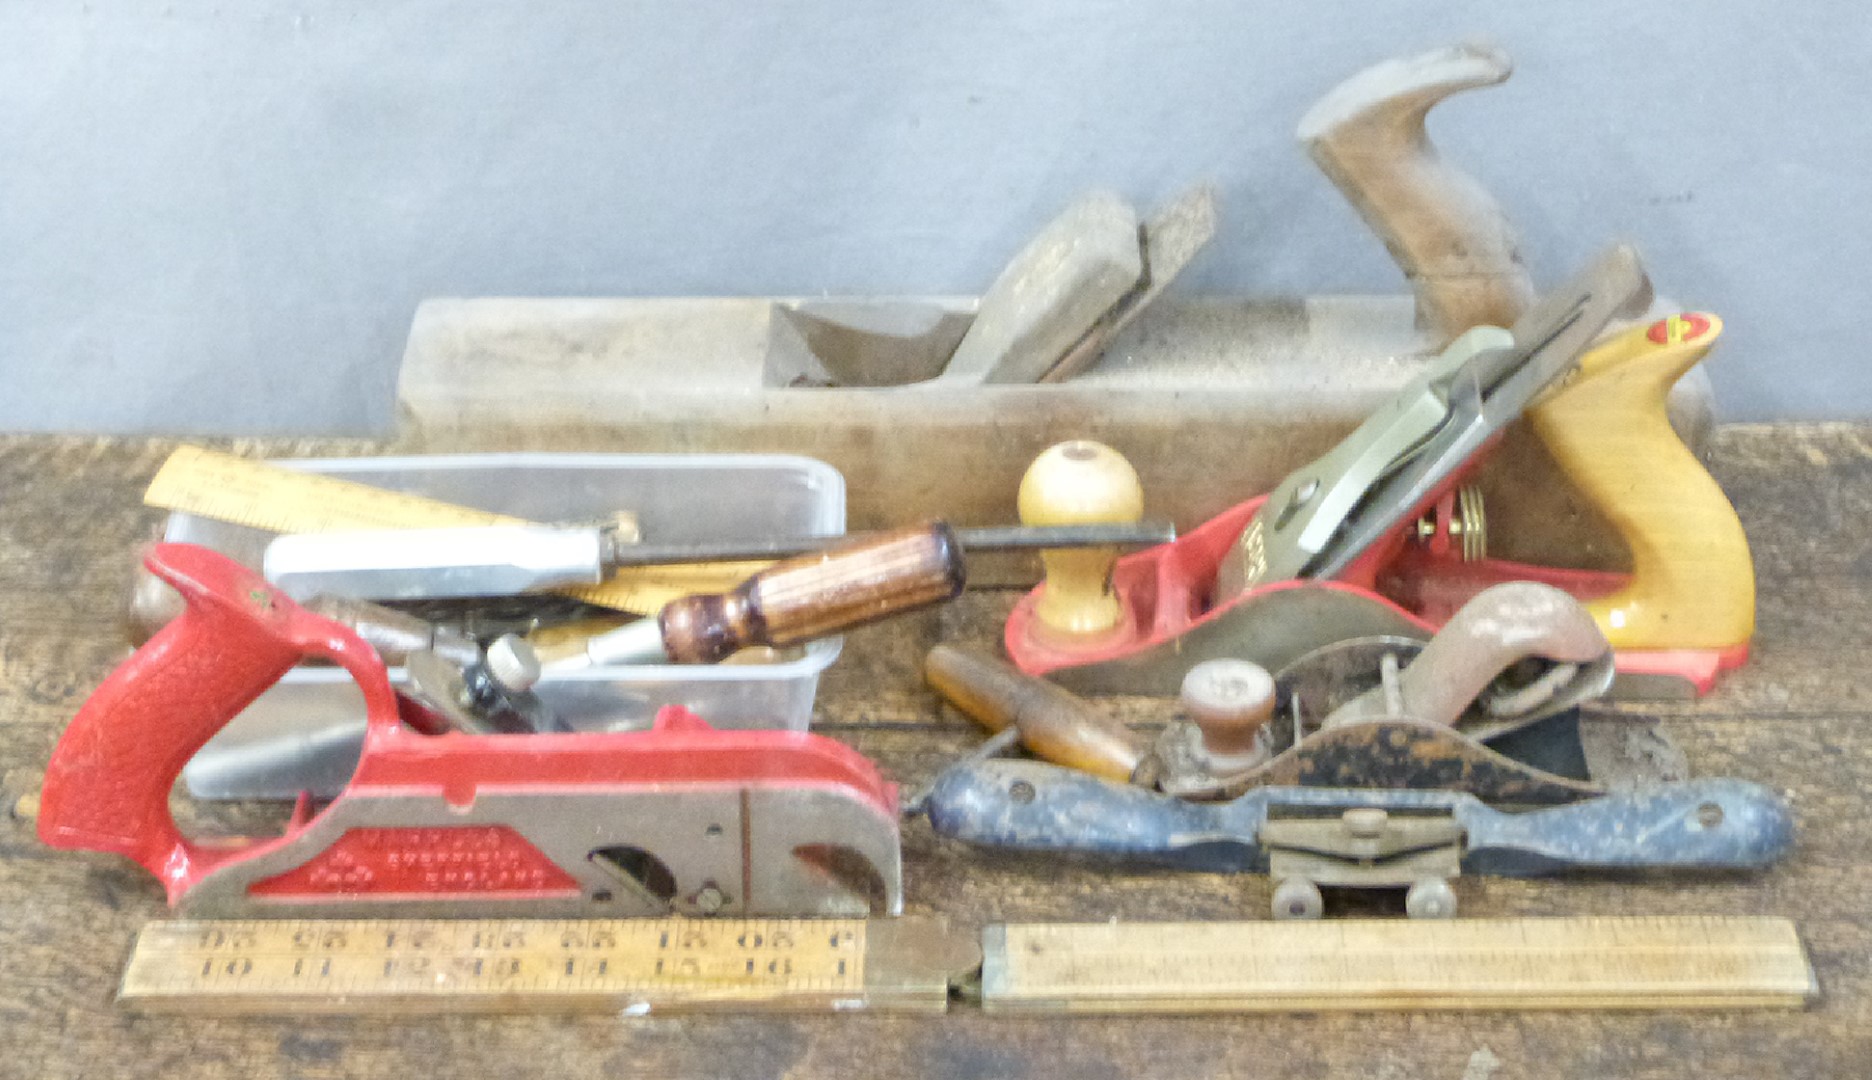 Woodworking planes and tools including Rabbet plane, Acorn, Record, folding rulers etc